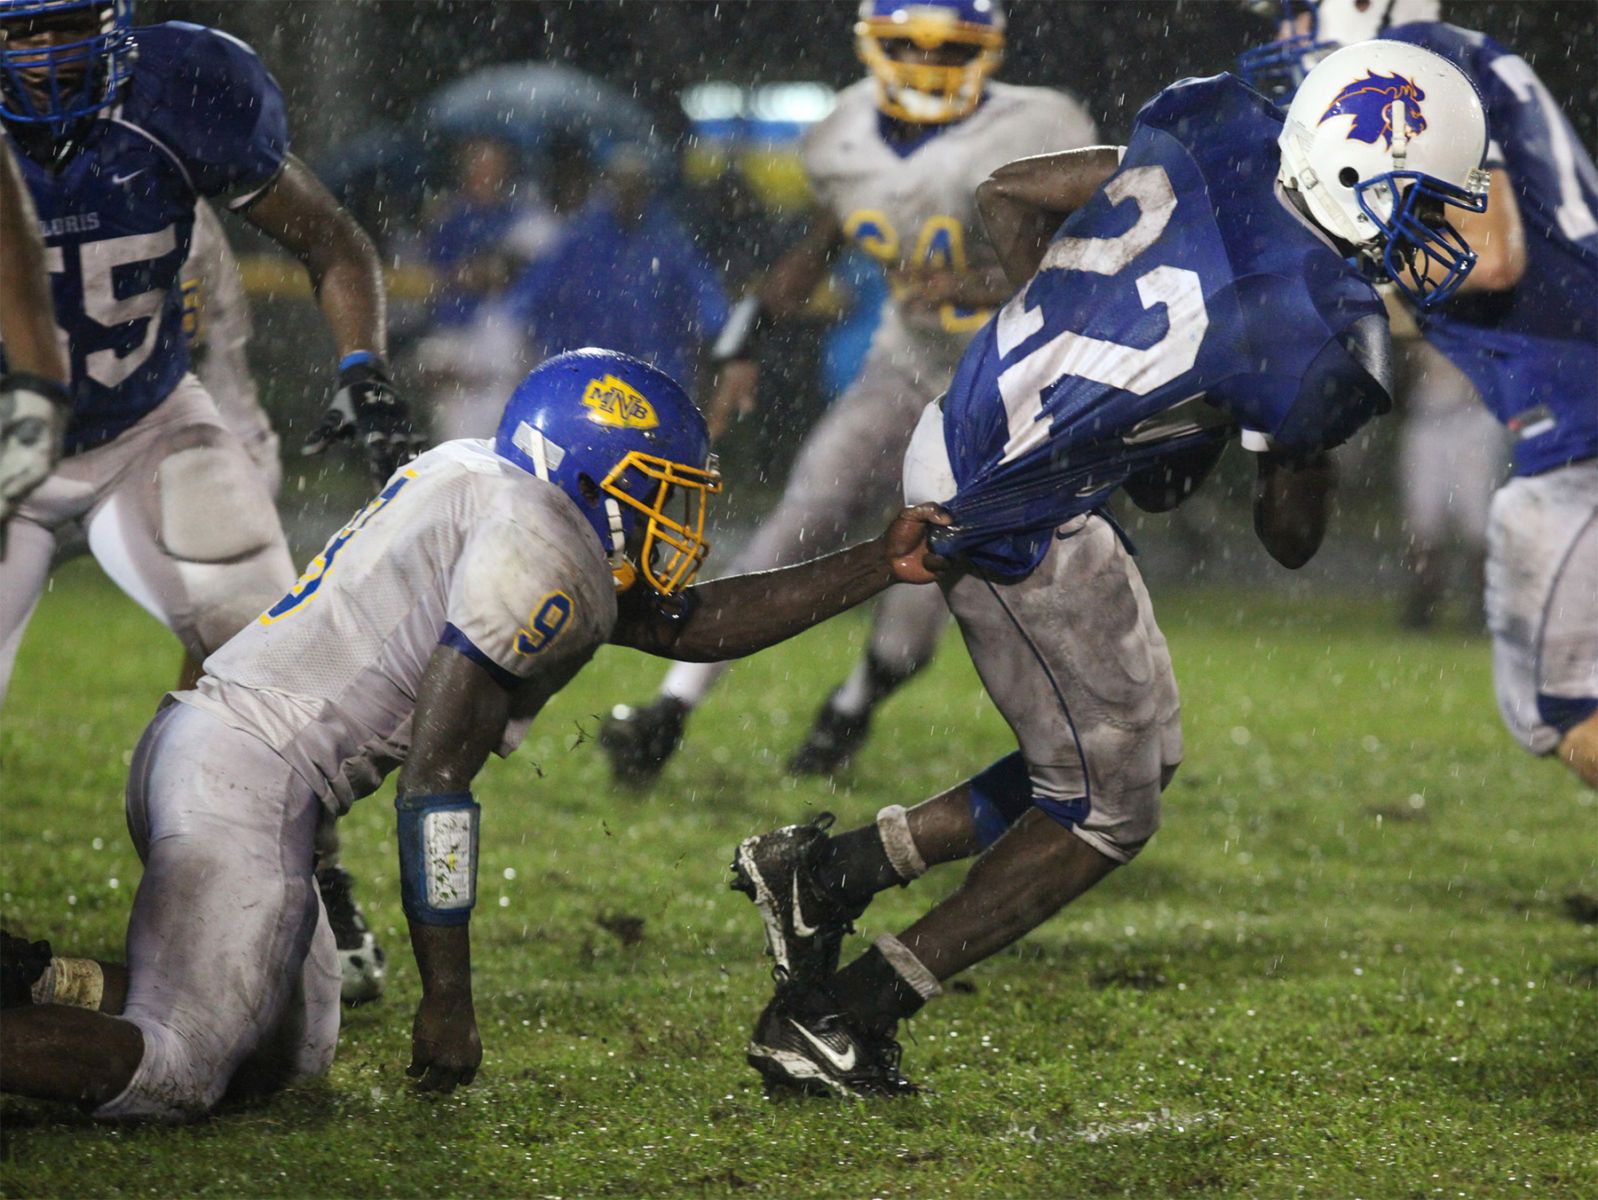 North Myrtle Beach defender Kelton Chestnut, 9, holds on to the jersey of Loris running back R.J. Brown, 22, during 4th quarter action during the Chiefs 14-6 win over cross county rivals Loris Friday night at Heniford Stadium in Loris. The teams played in a constant downpour throughout the second half of the game as the battle of supremacy of northern Horry was determined by the defense of the two teams.